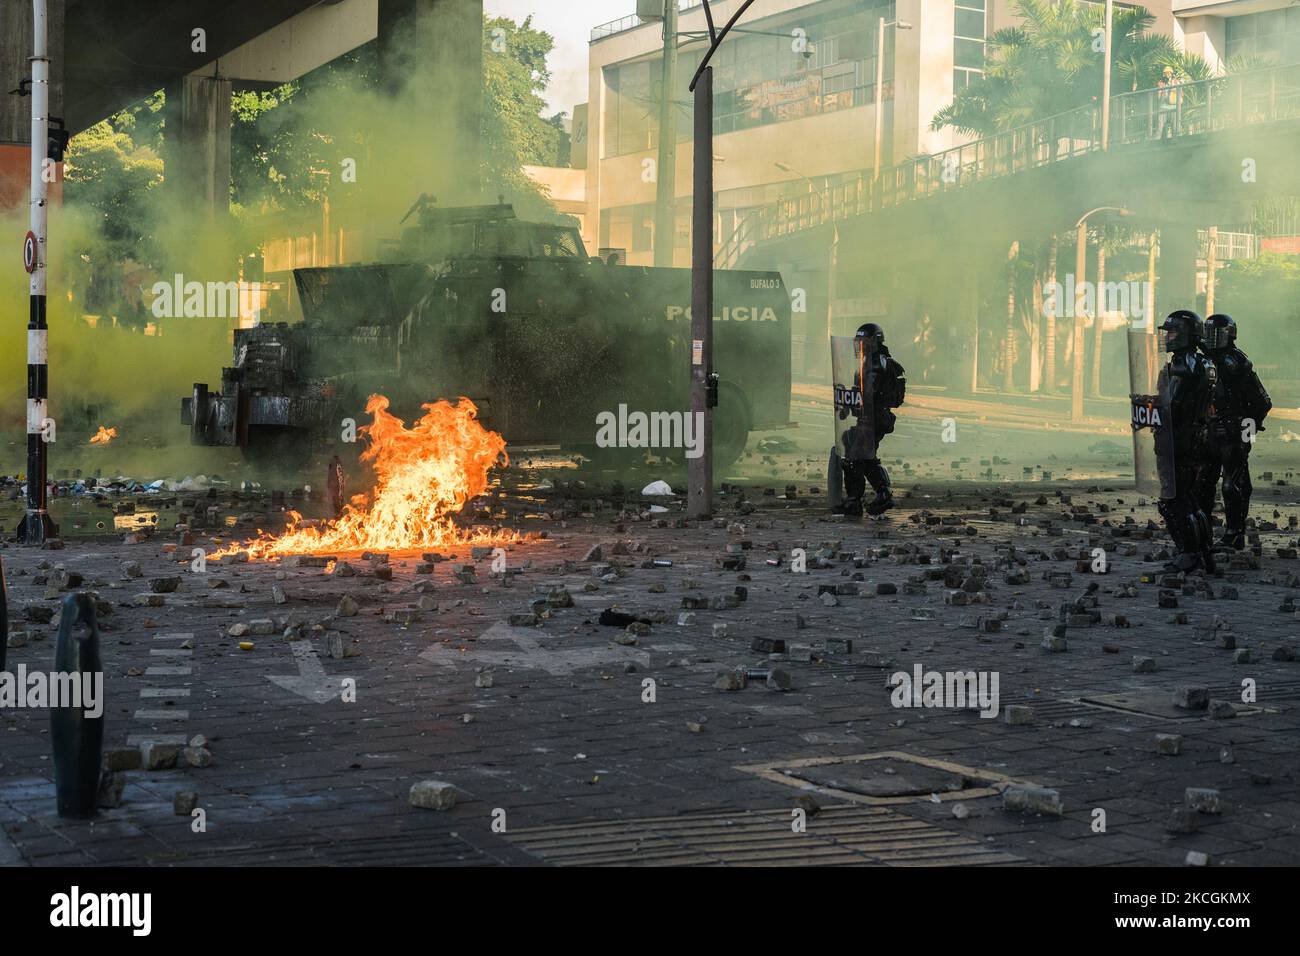 Demonstrators clash with riot police during a protest against the government in Medellin, Colombia, on June 28, 2021. Some people injured by police shoots with no letal guns. (Photo by Santiago Botero/NurPhoto) Stock Photo